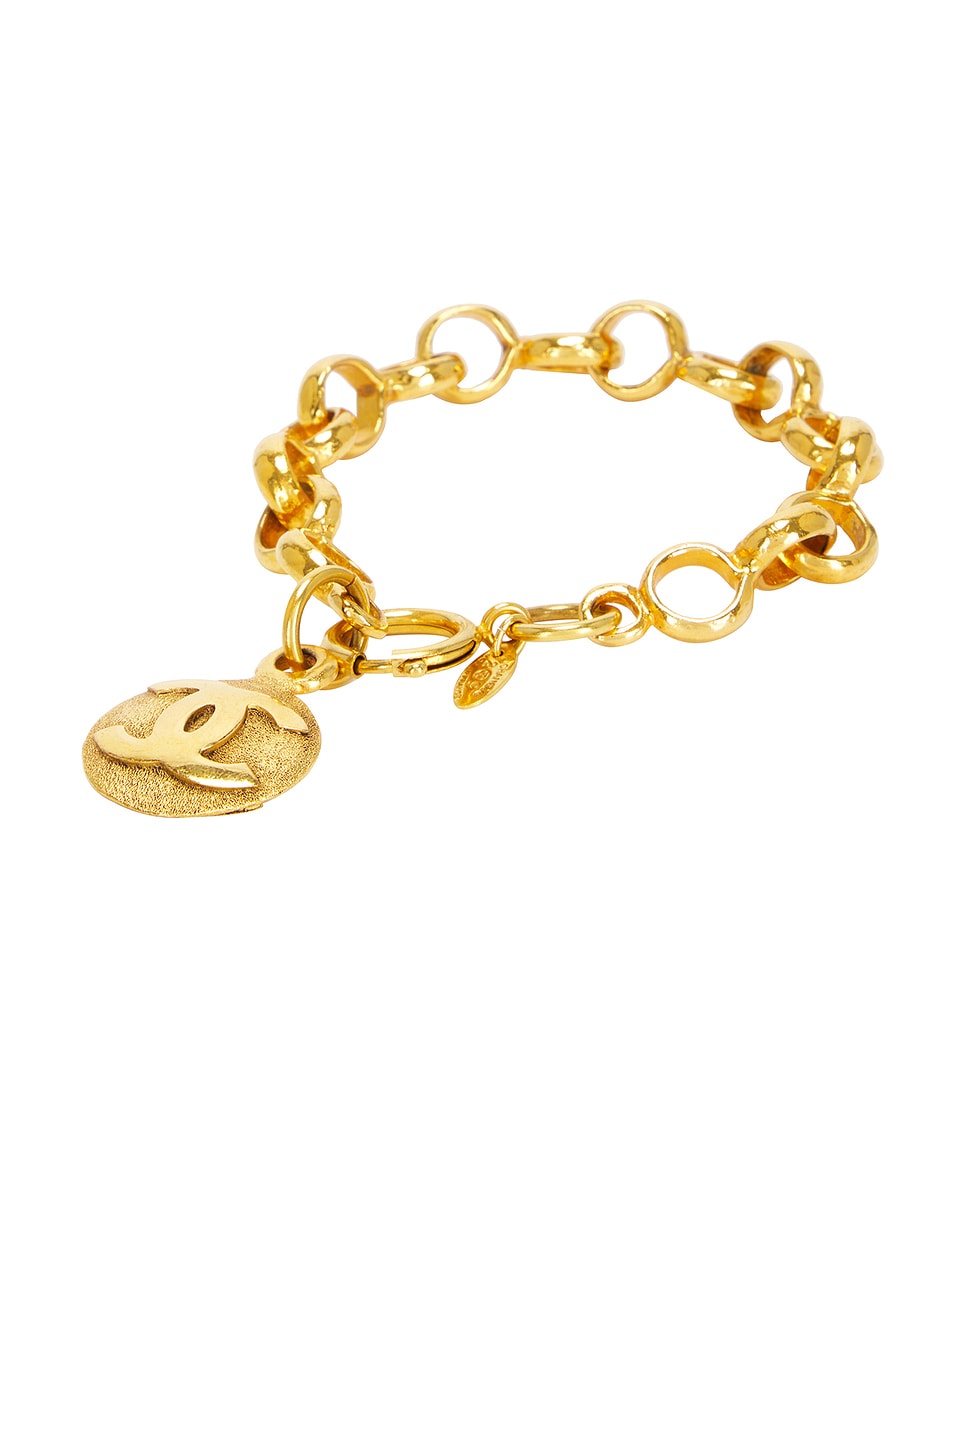 Image 1 of FWRD Renew Chanel Coco Mark Chain Bracelet in Gold